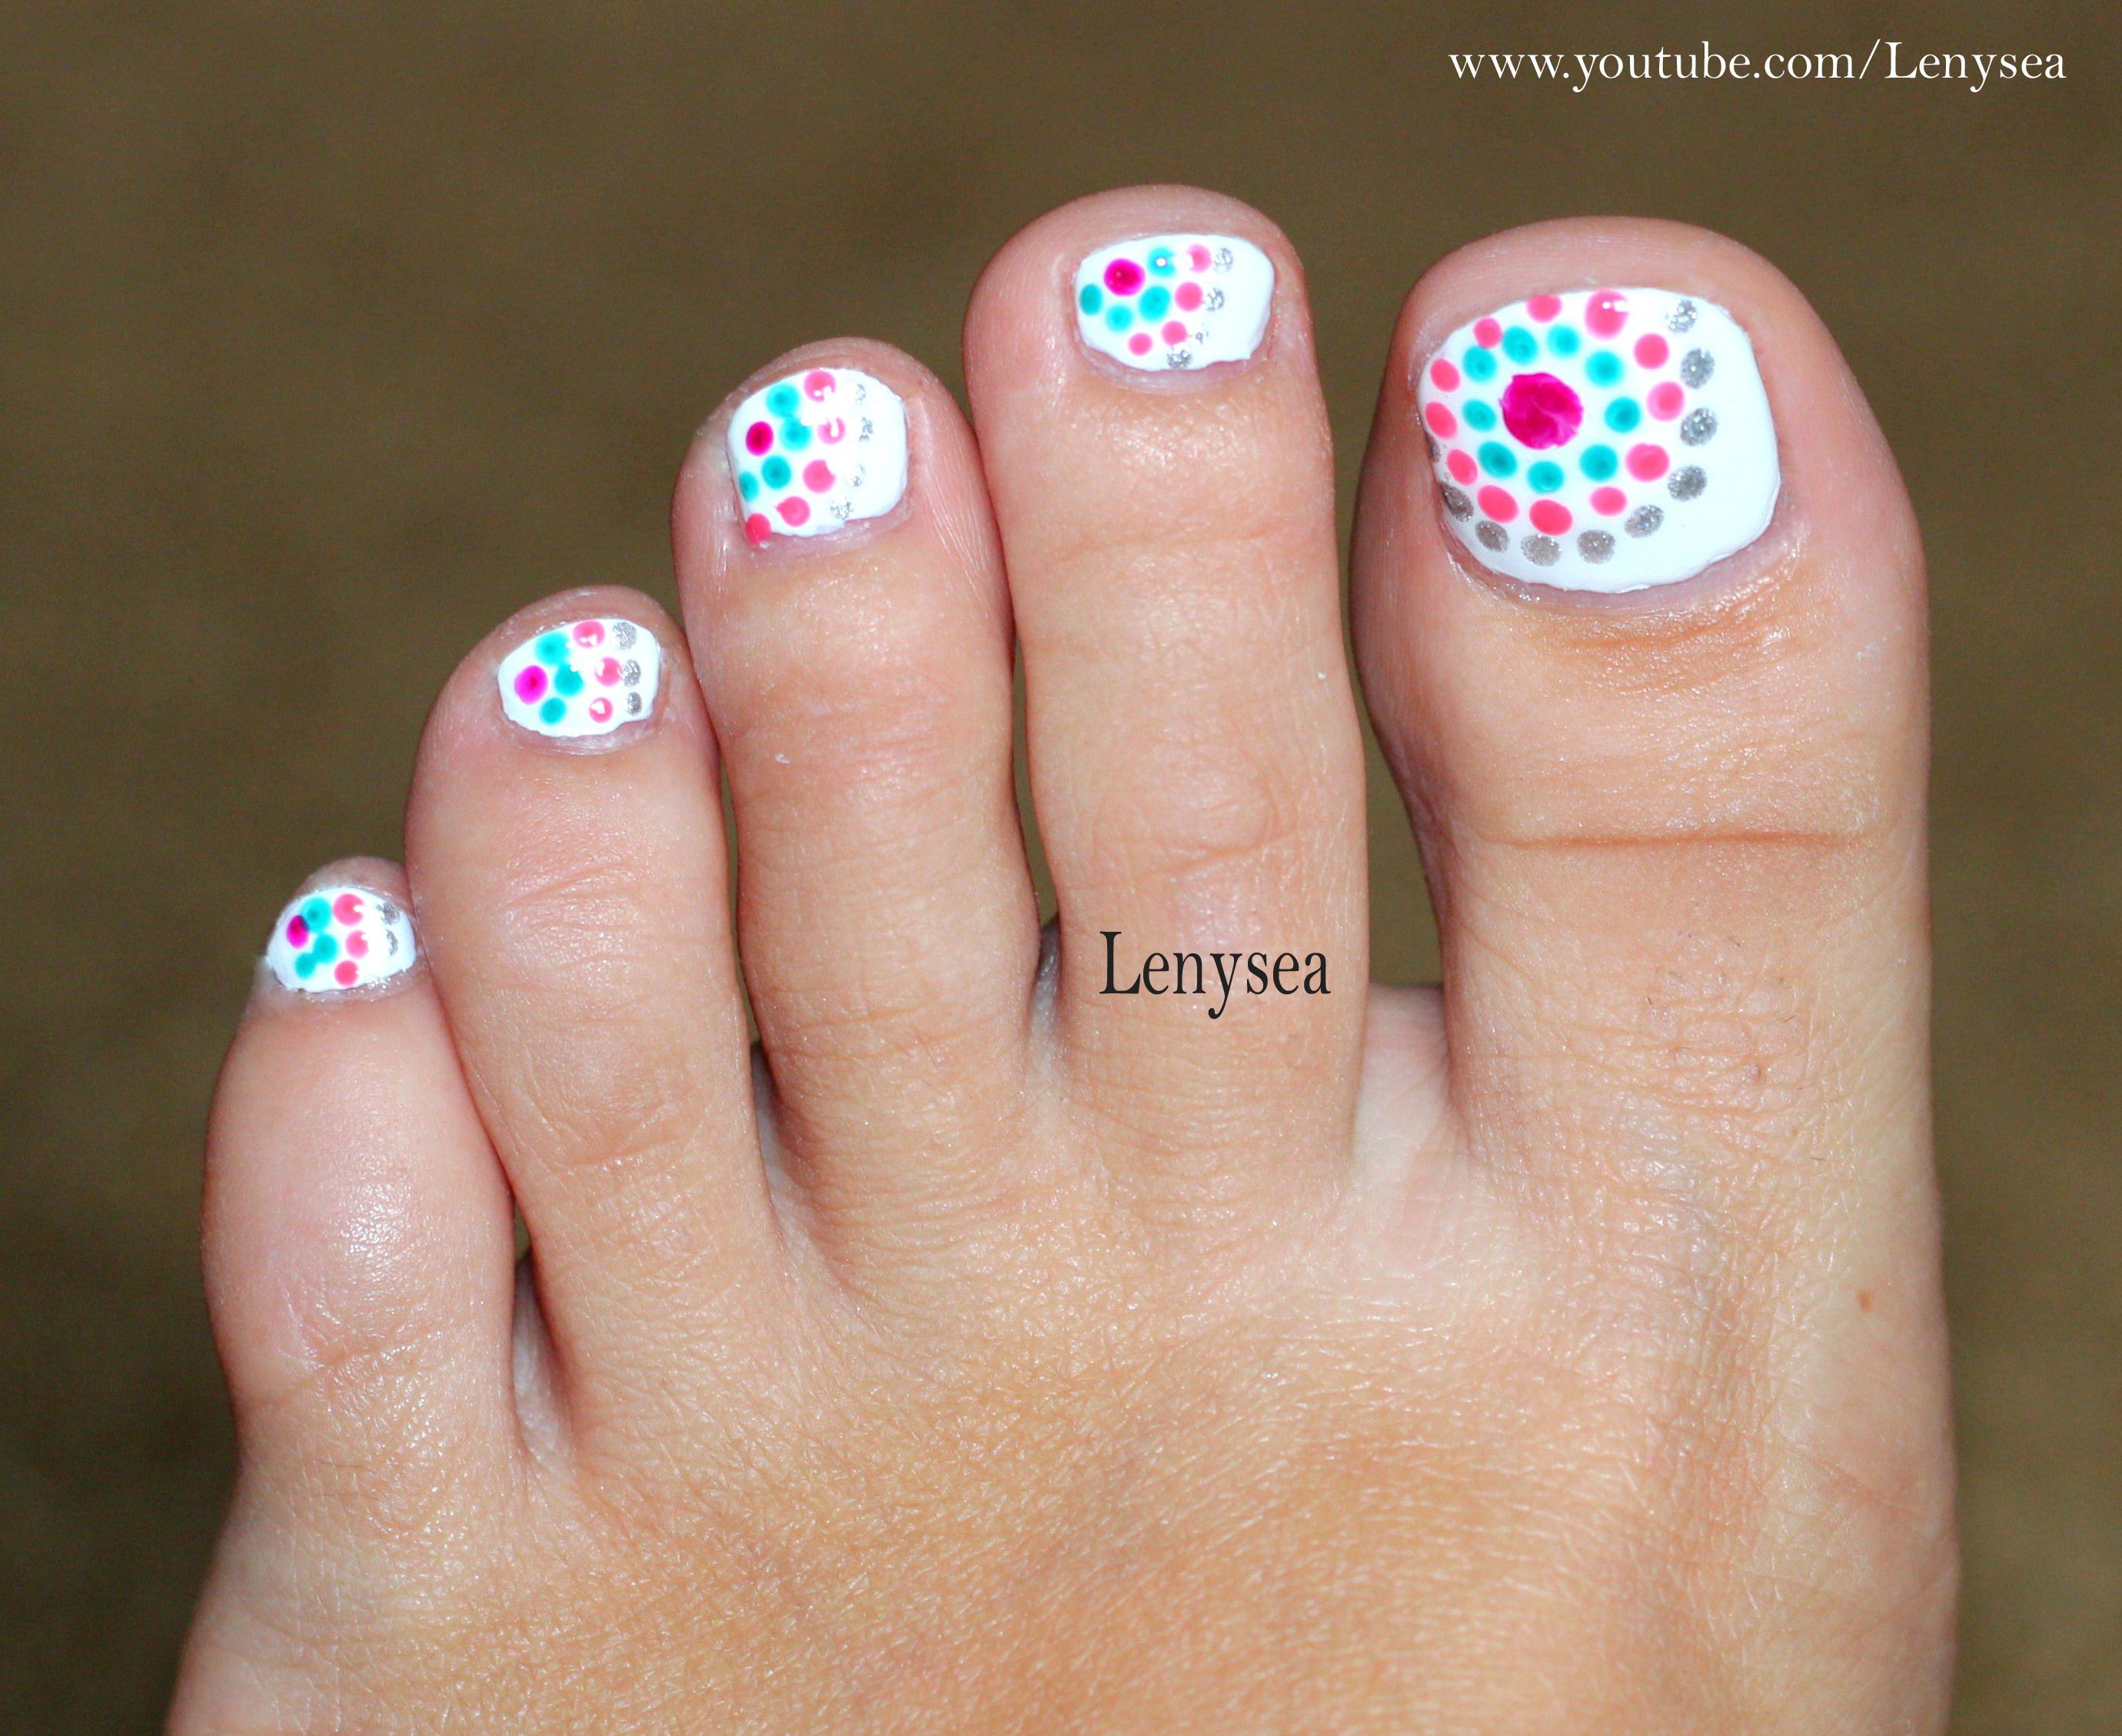 Cute and easy toe nail design for summer! @Christina & Watkins this would be good to try with my new dotting